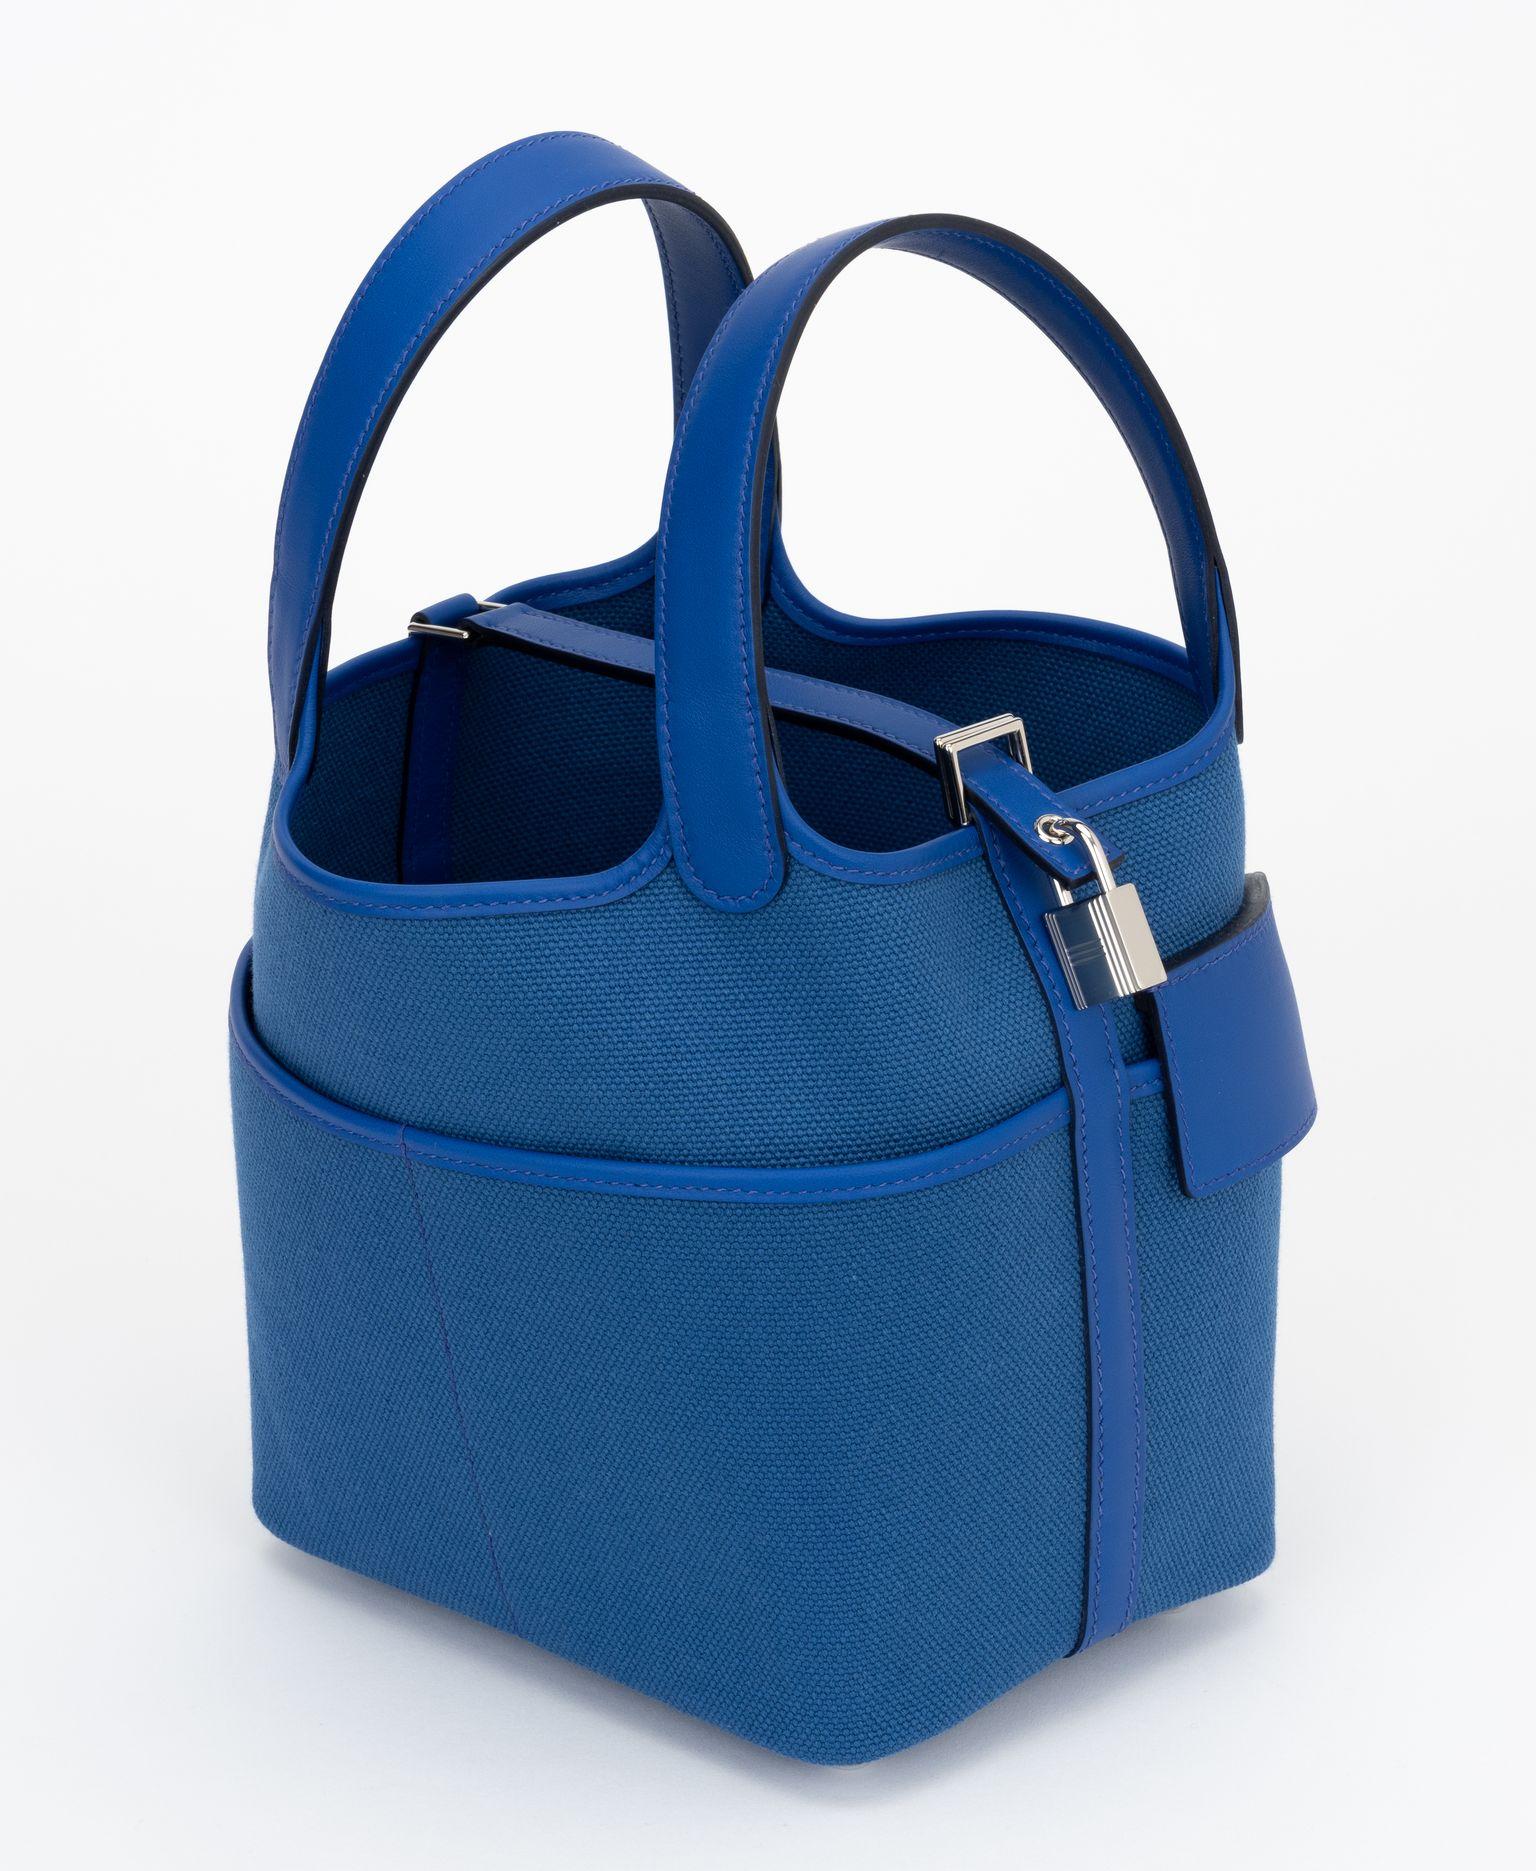 Hermès new in box blue royal Swift and Toile Geoland Cargo Picotin Lock 18, palladium hardware . This chic and lovely tote is crafted of sturdy canvas in blue royal. The bag features looping leather top handles, exterior pockets, and palladium